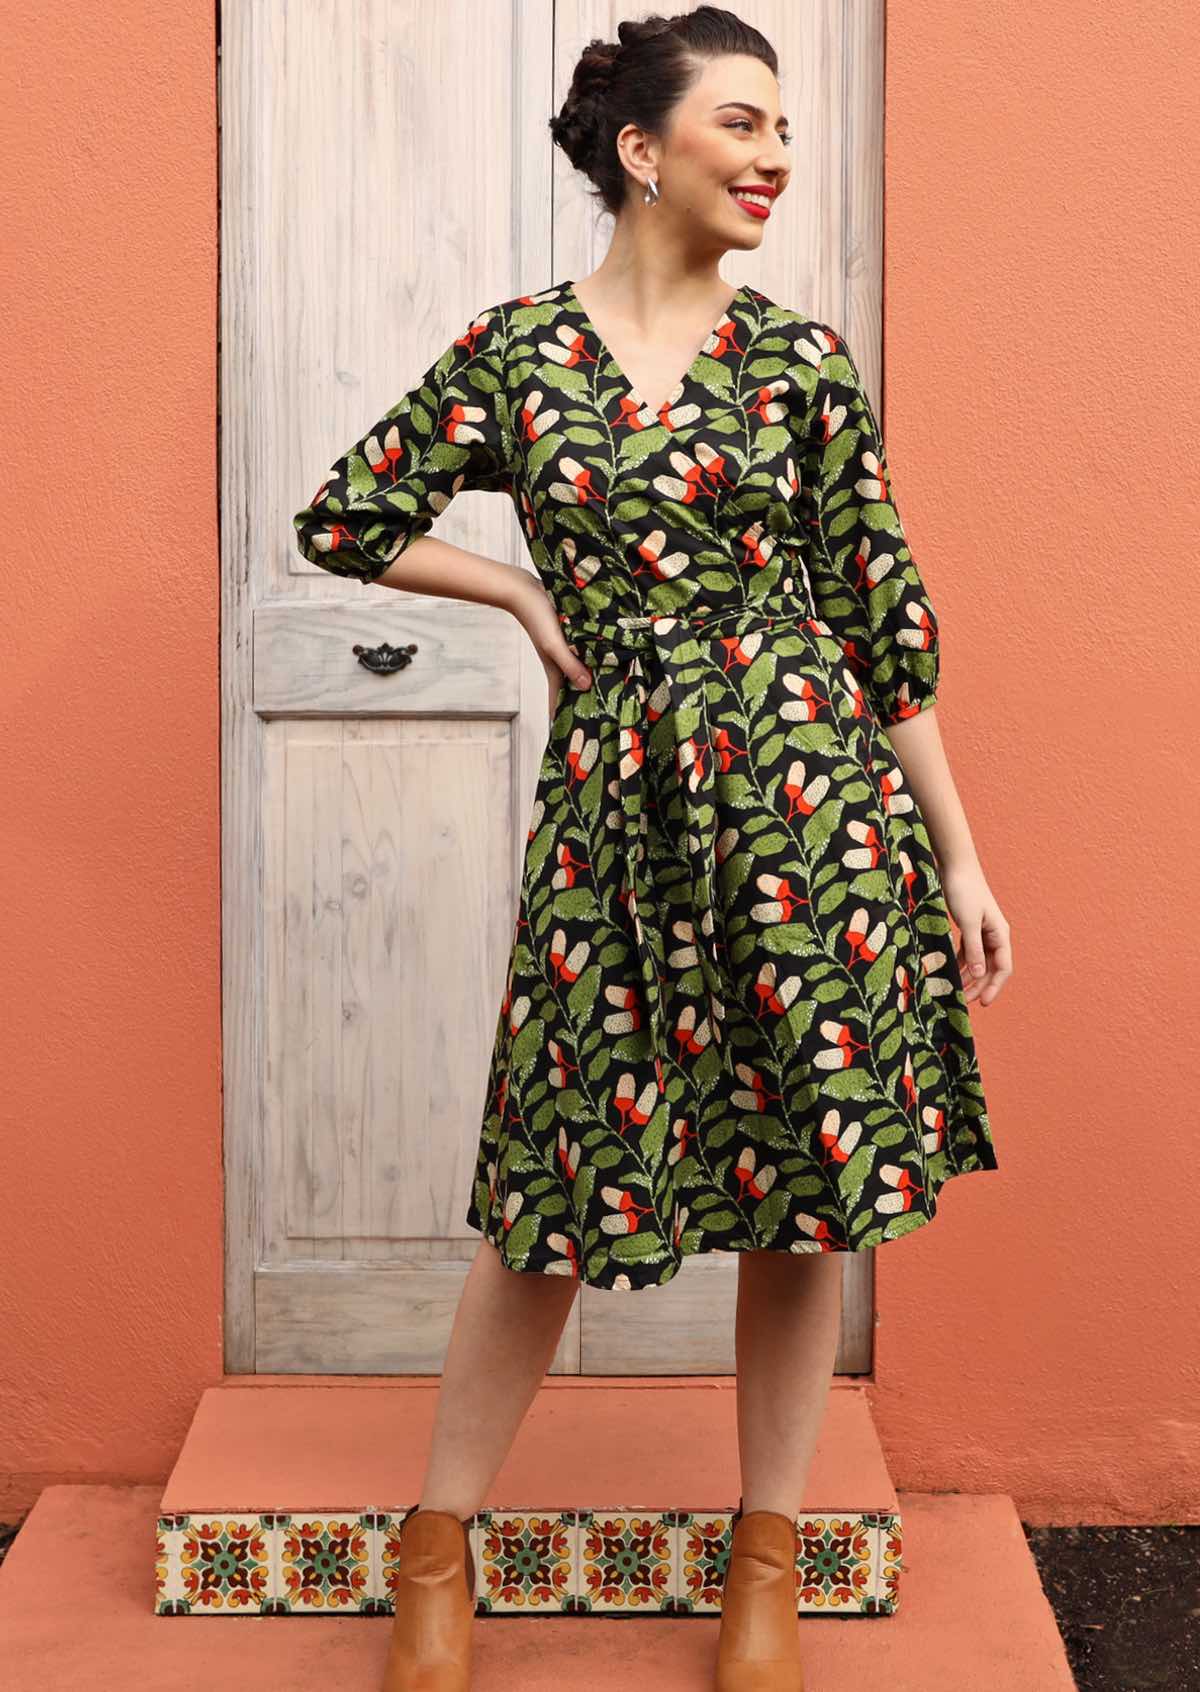 Model wears green and black print cotton wrap dress with V-neck